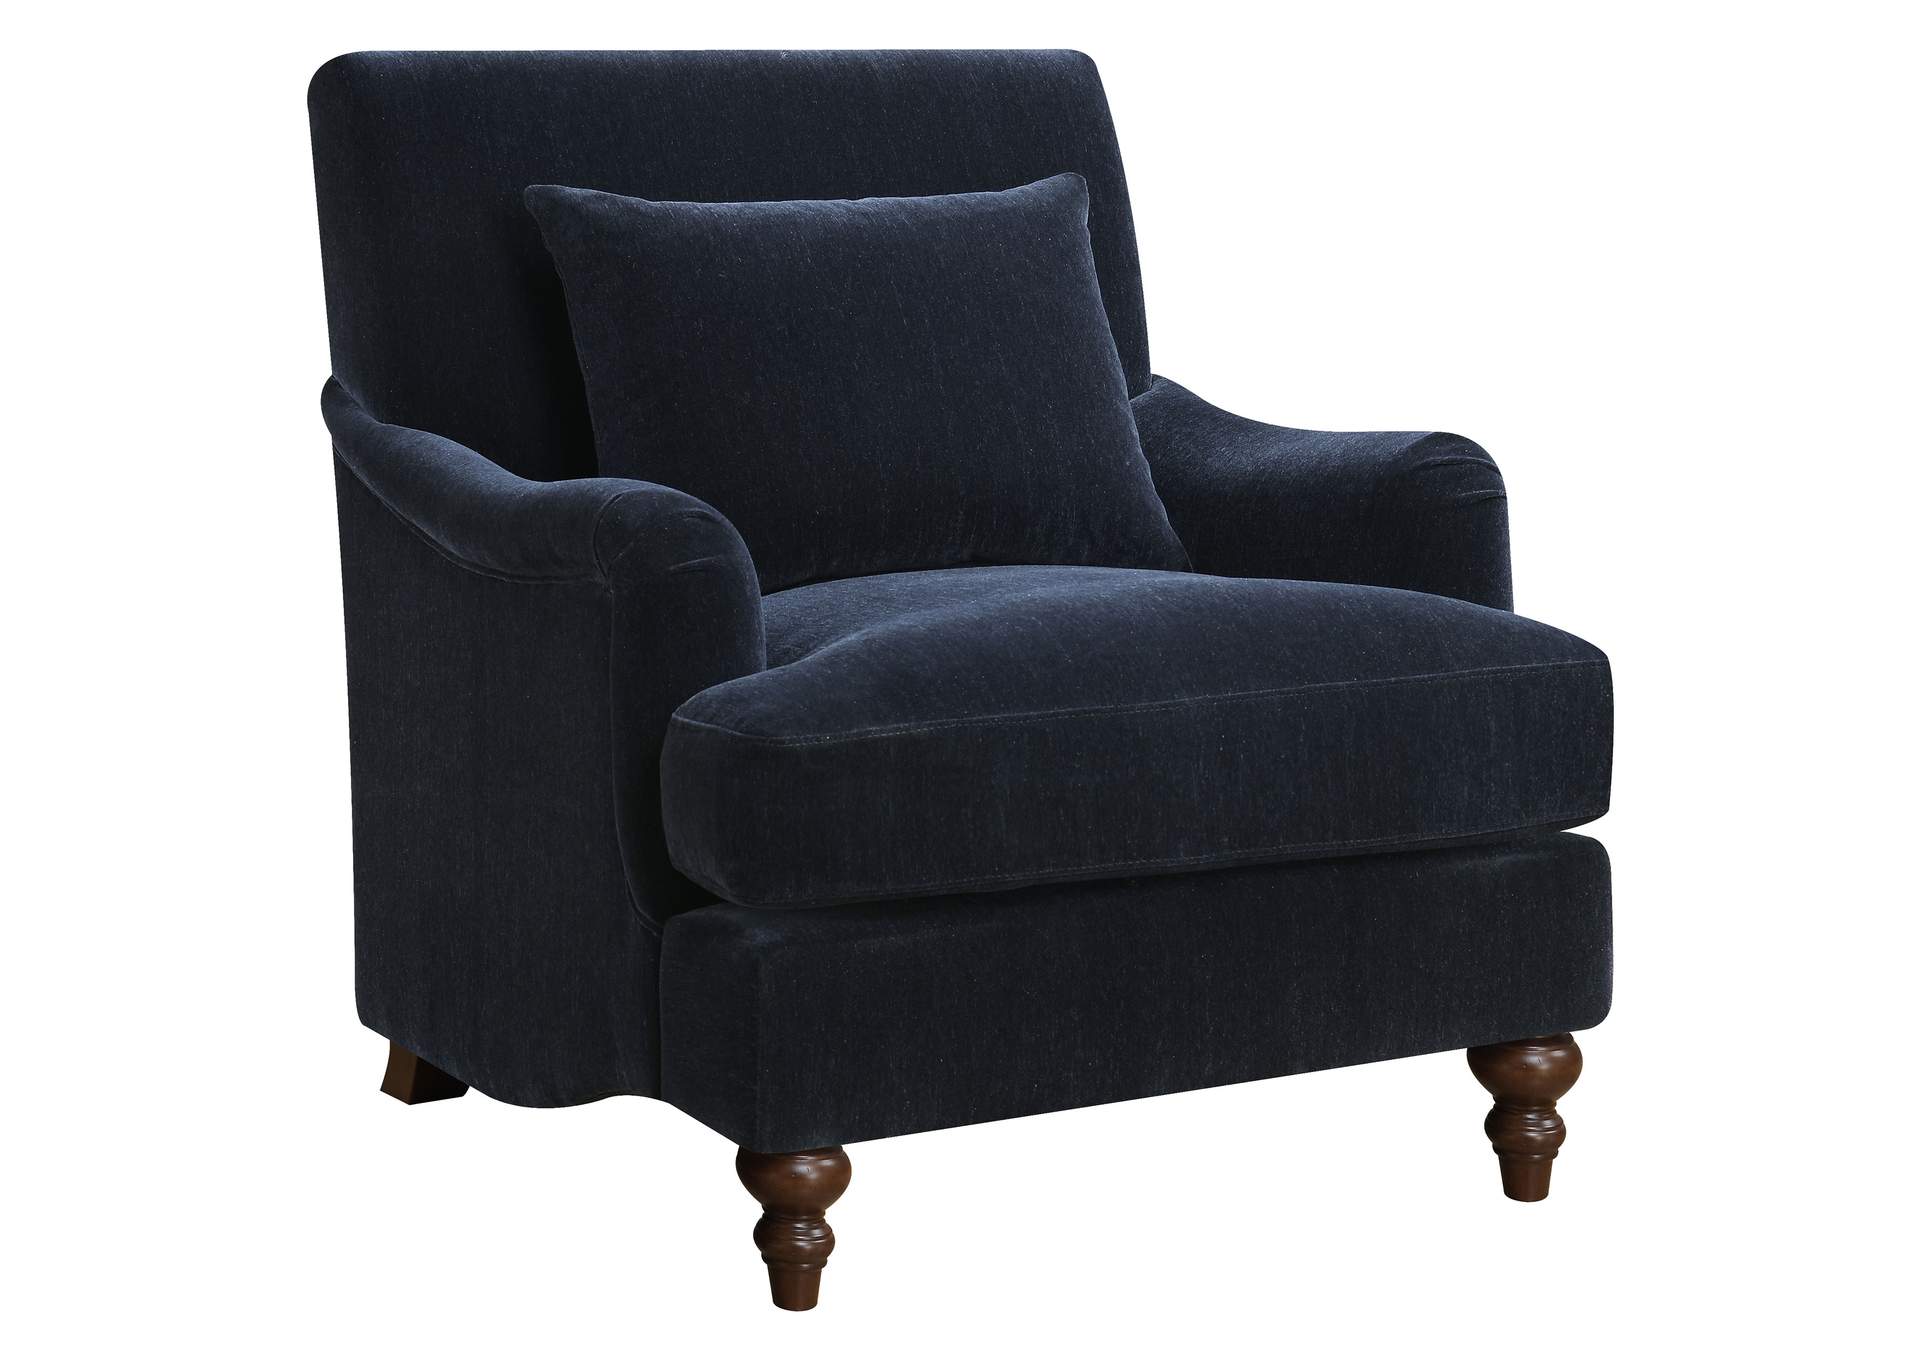 Frodo Upholstered Accent Chair with Turned Legs Midnight Blue,Coaster Furniture